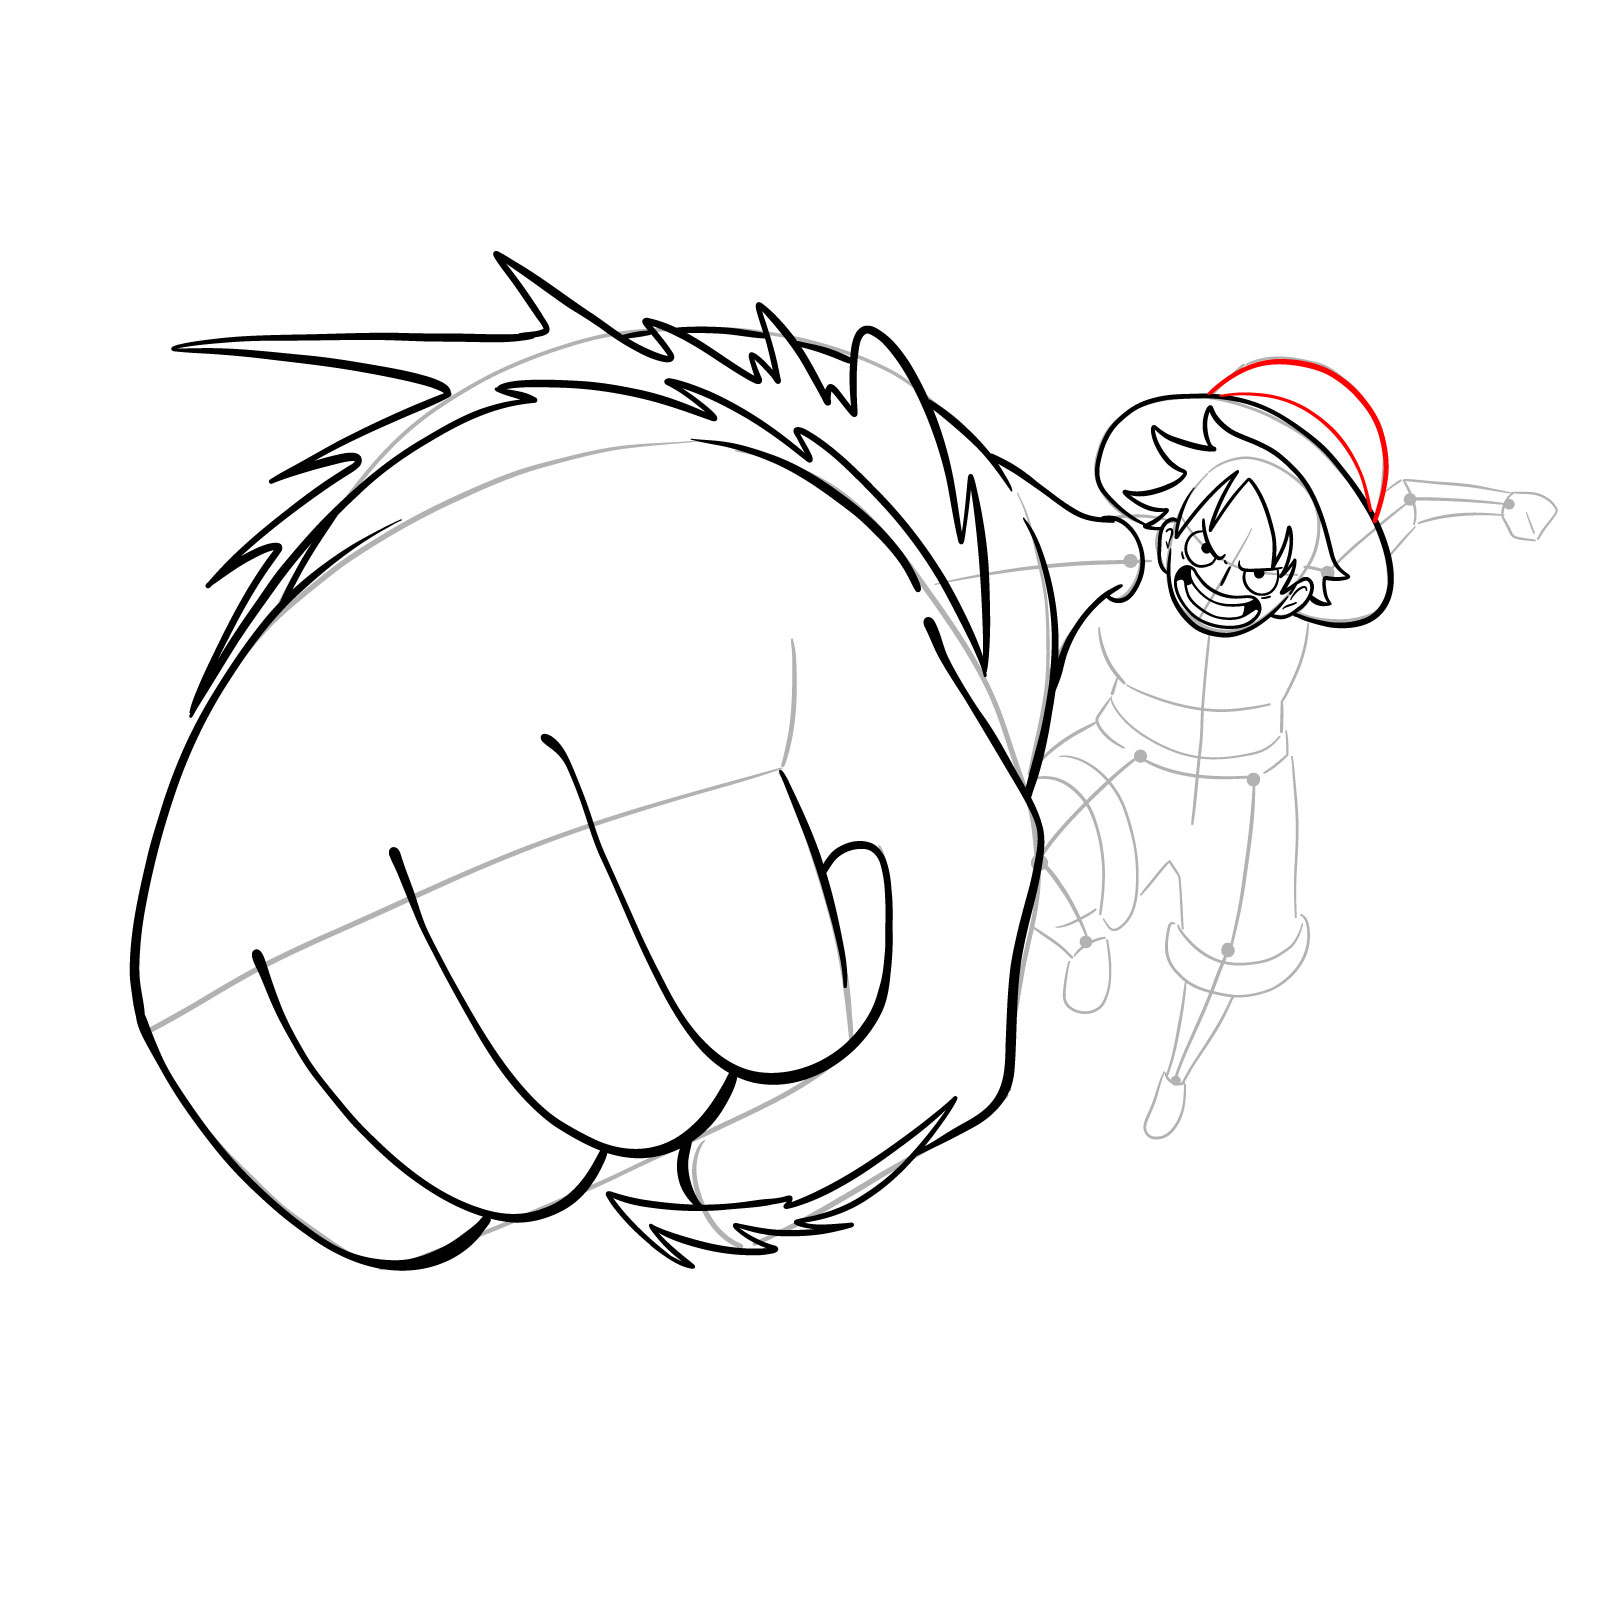 How to draw Luffy's Gear 3 without haki - step 23